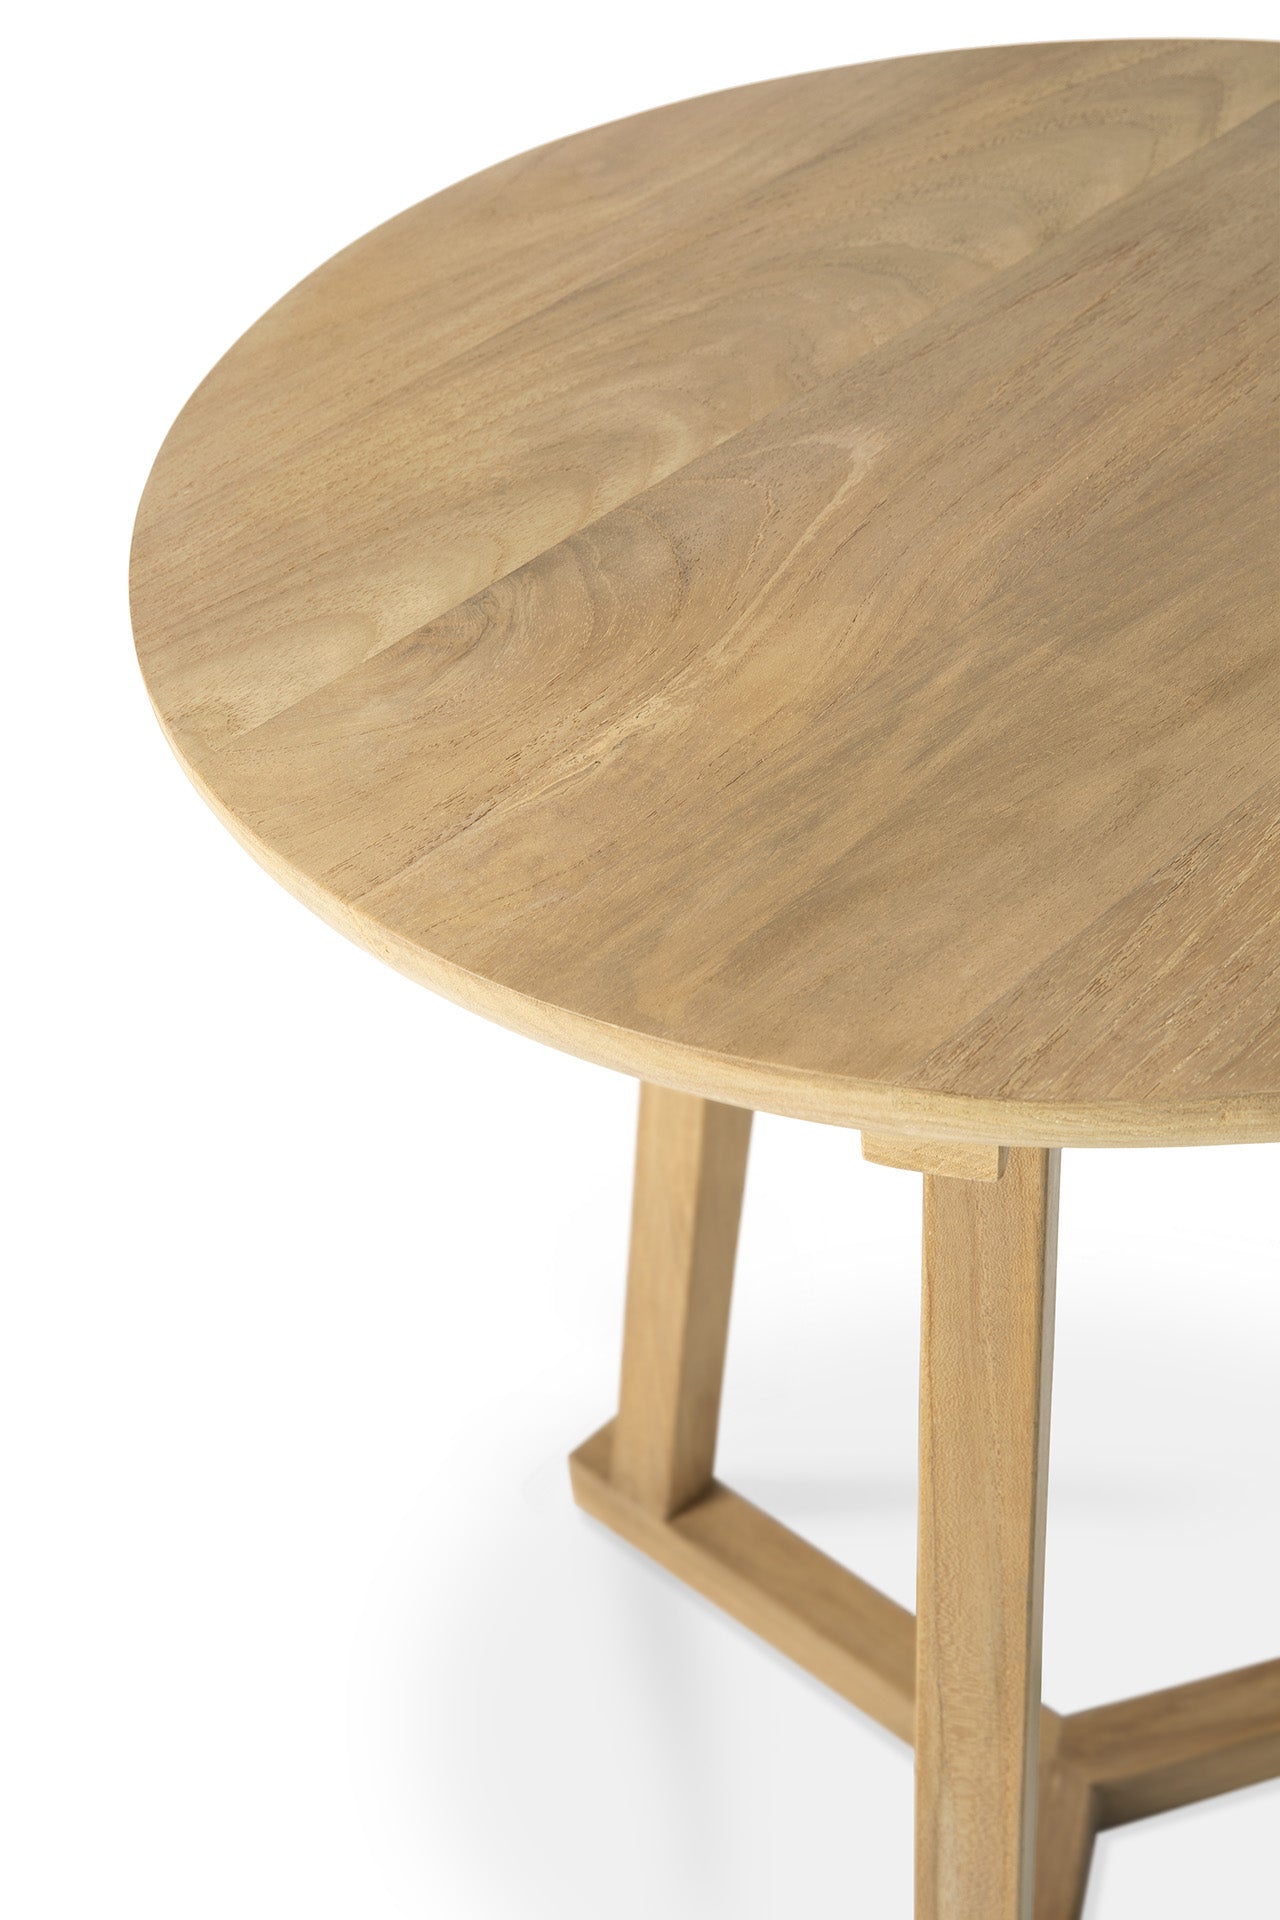 Ethnicraft Oak Tripod Side Table available from Make Your House A Home, Bendigo, Victoria, Australia